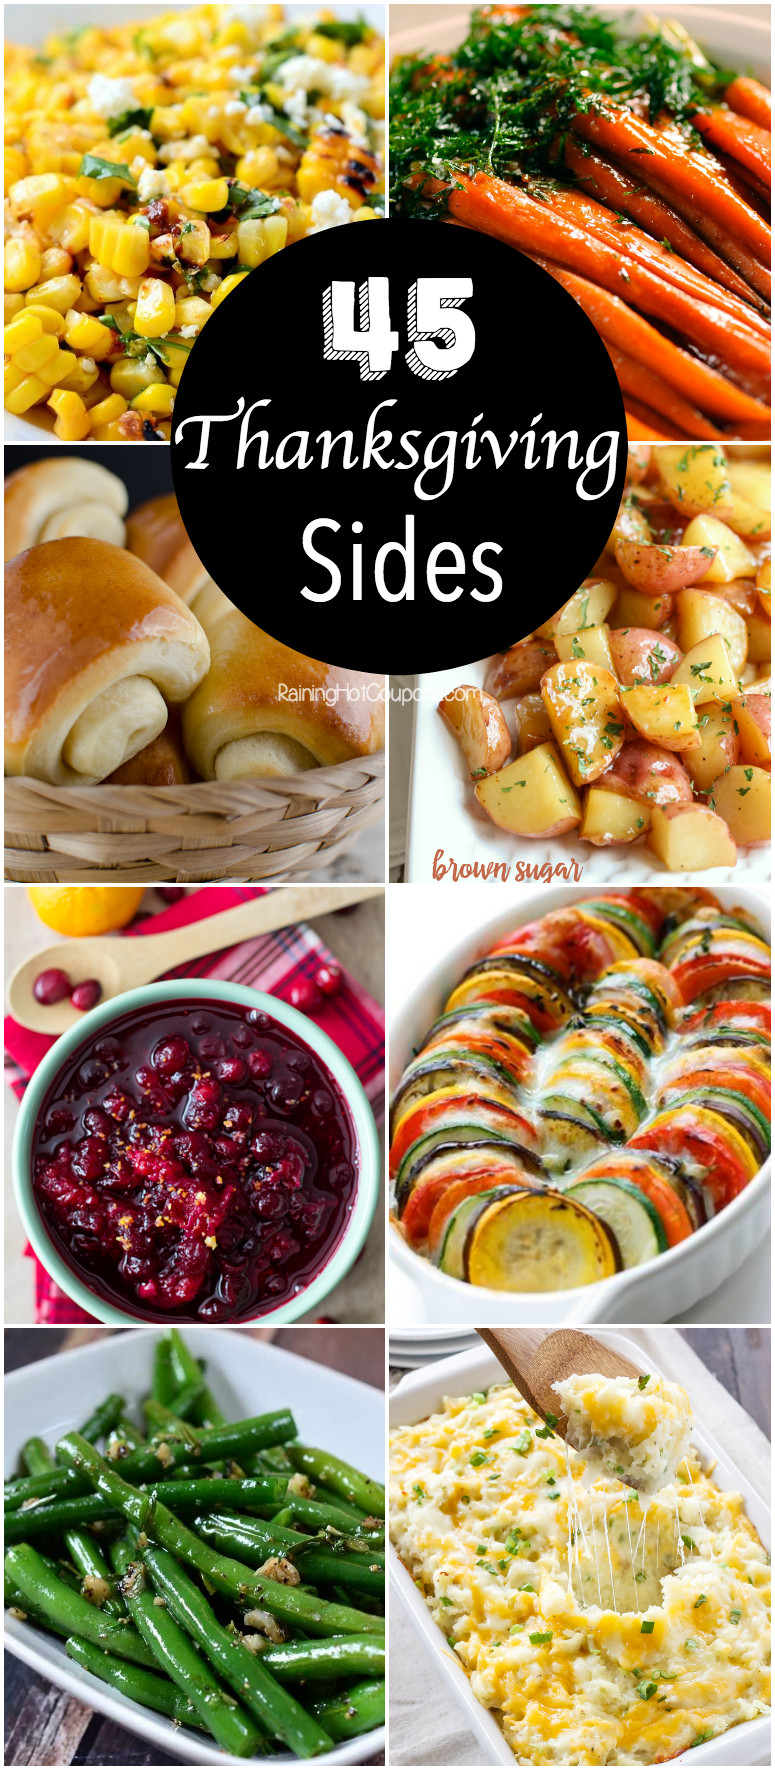 Best Thanksgiving Side Dishes
 45 Thanksgiving Side Dishes